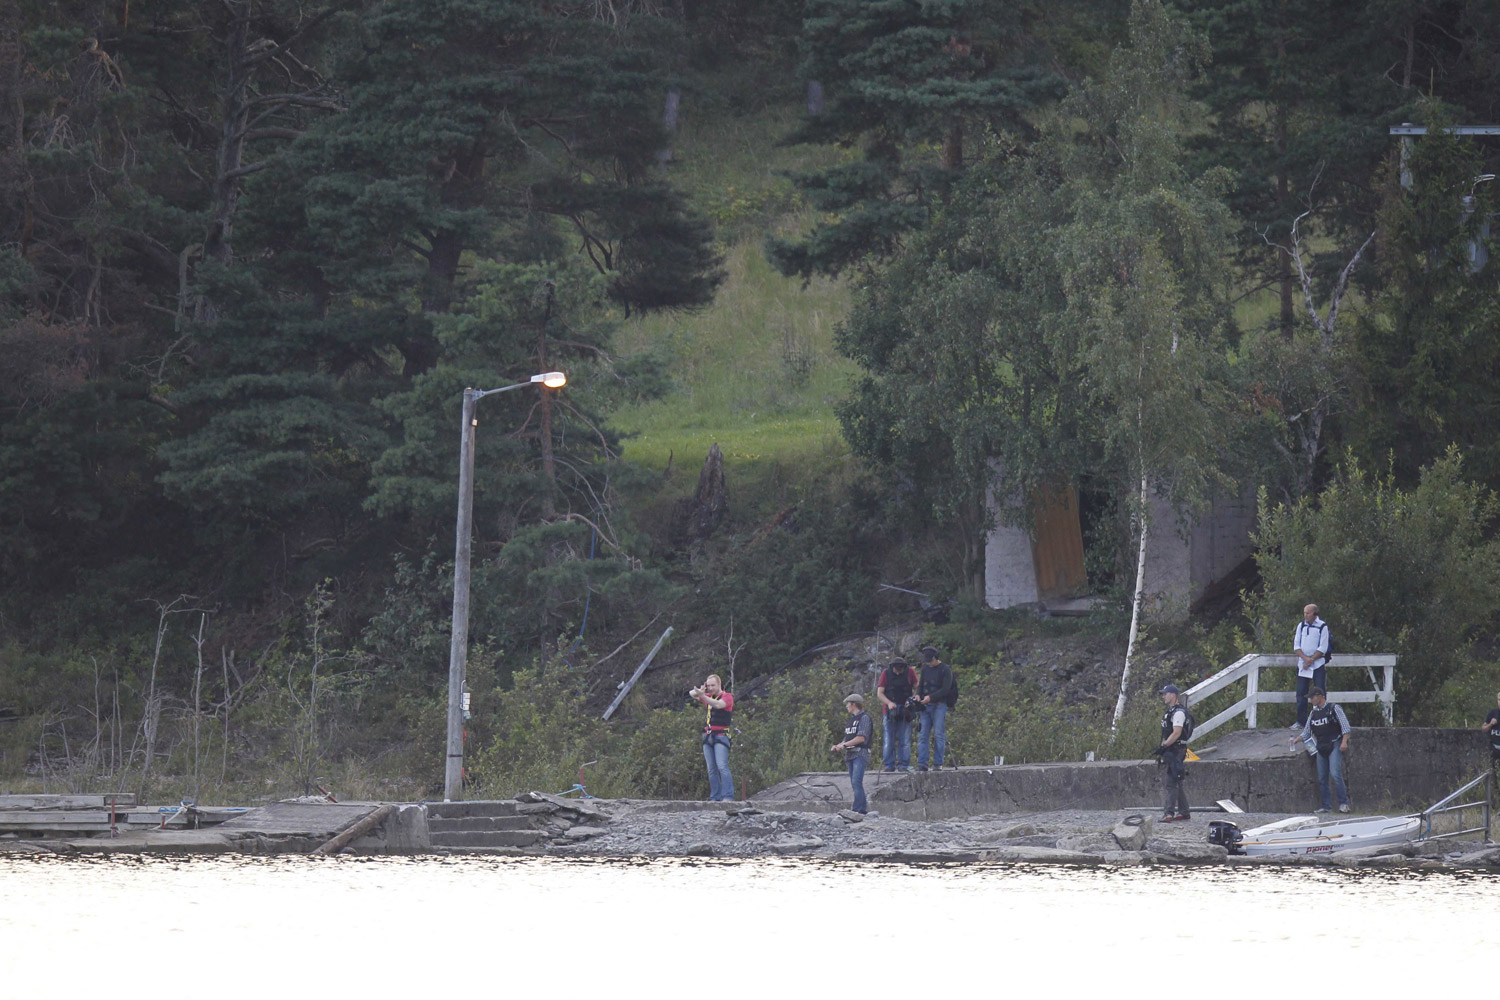 August 13, 2011. Under heavily armoured police guard, Anders Behring Breivik arrives back at Utoya for reconstruction of his terror actions on the island. Breivik (in red T-shirt) was tied with a rope.